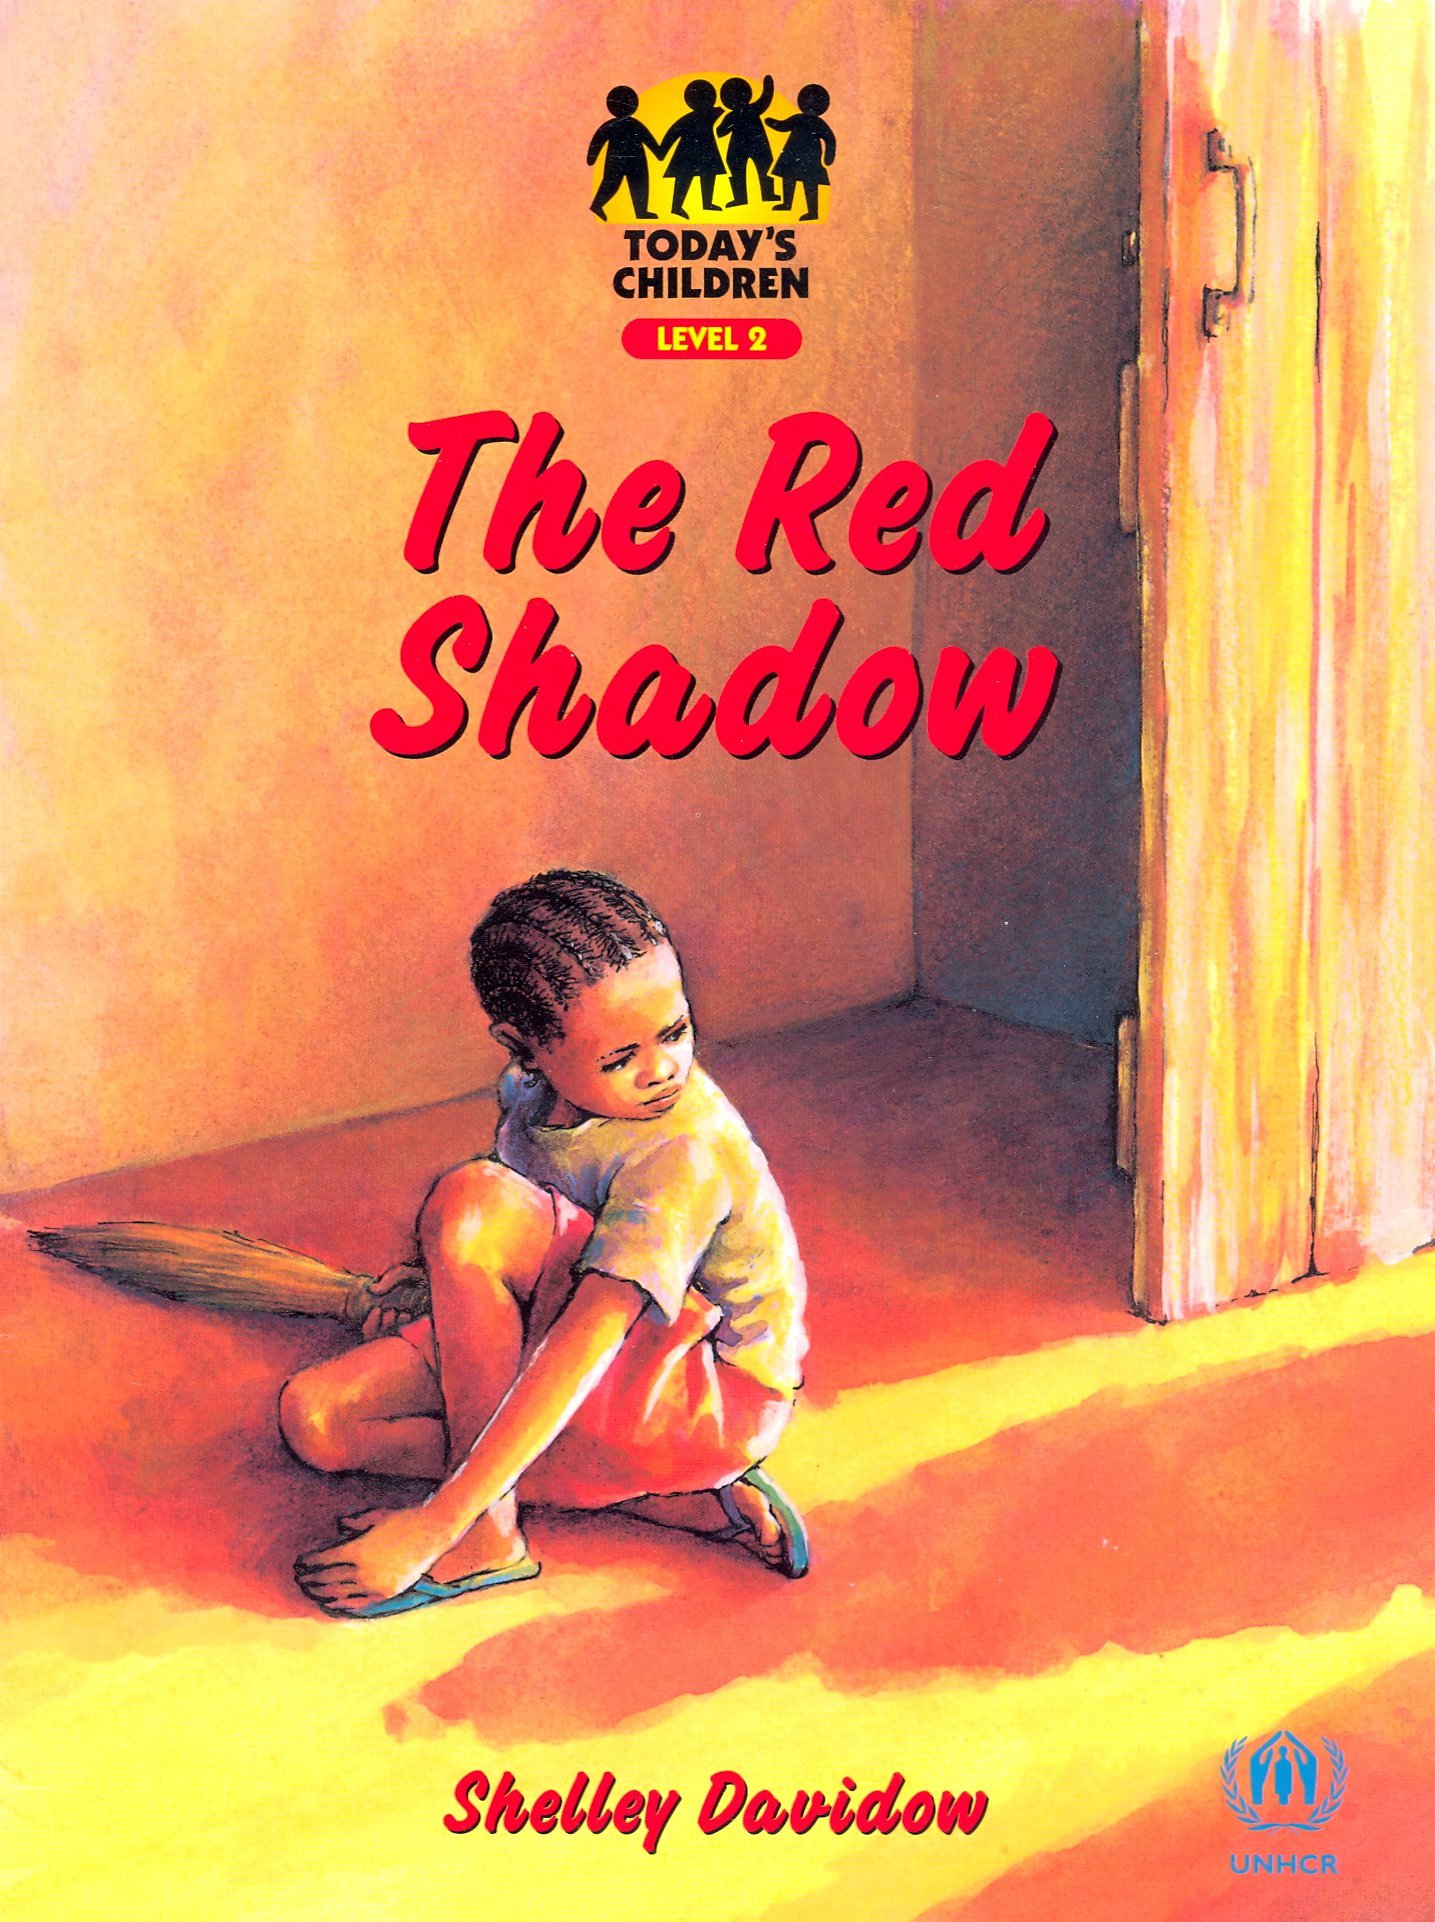 The Red Shadow- Level 2 (Today's Children) by Shelley Davidow